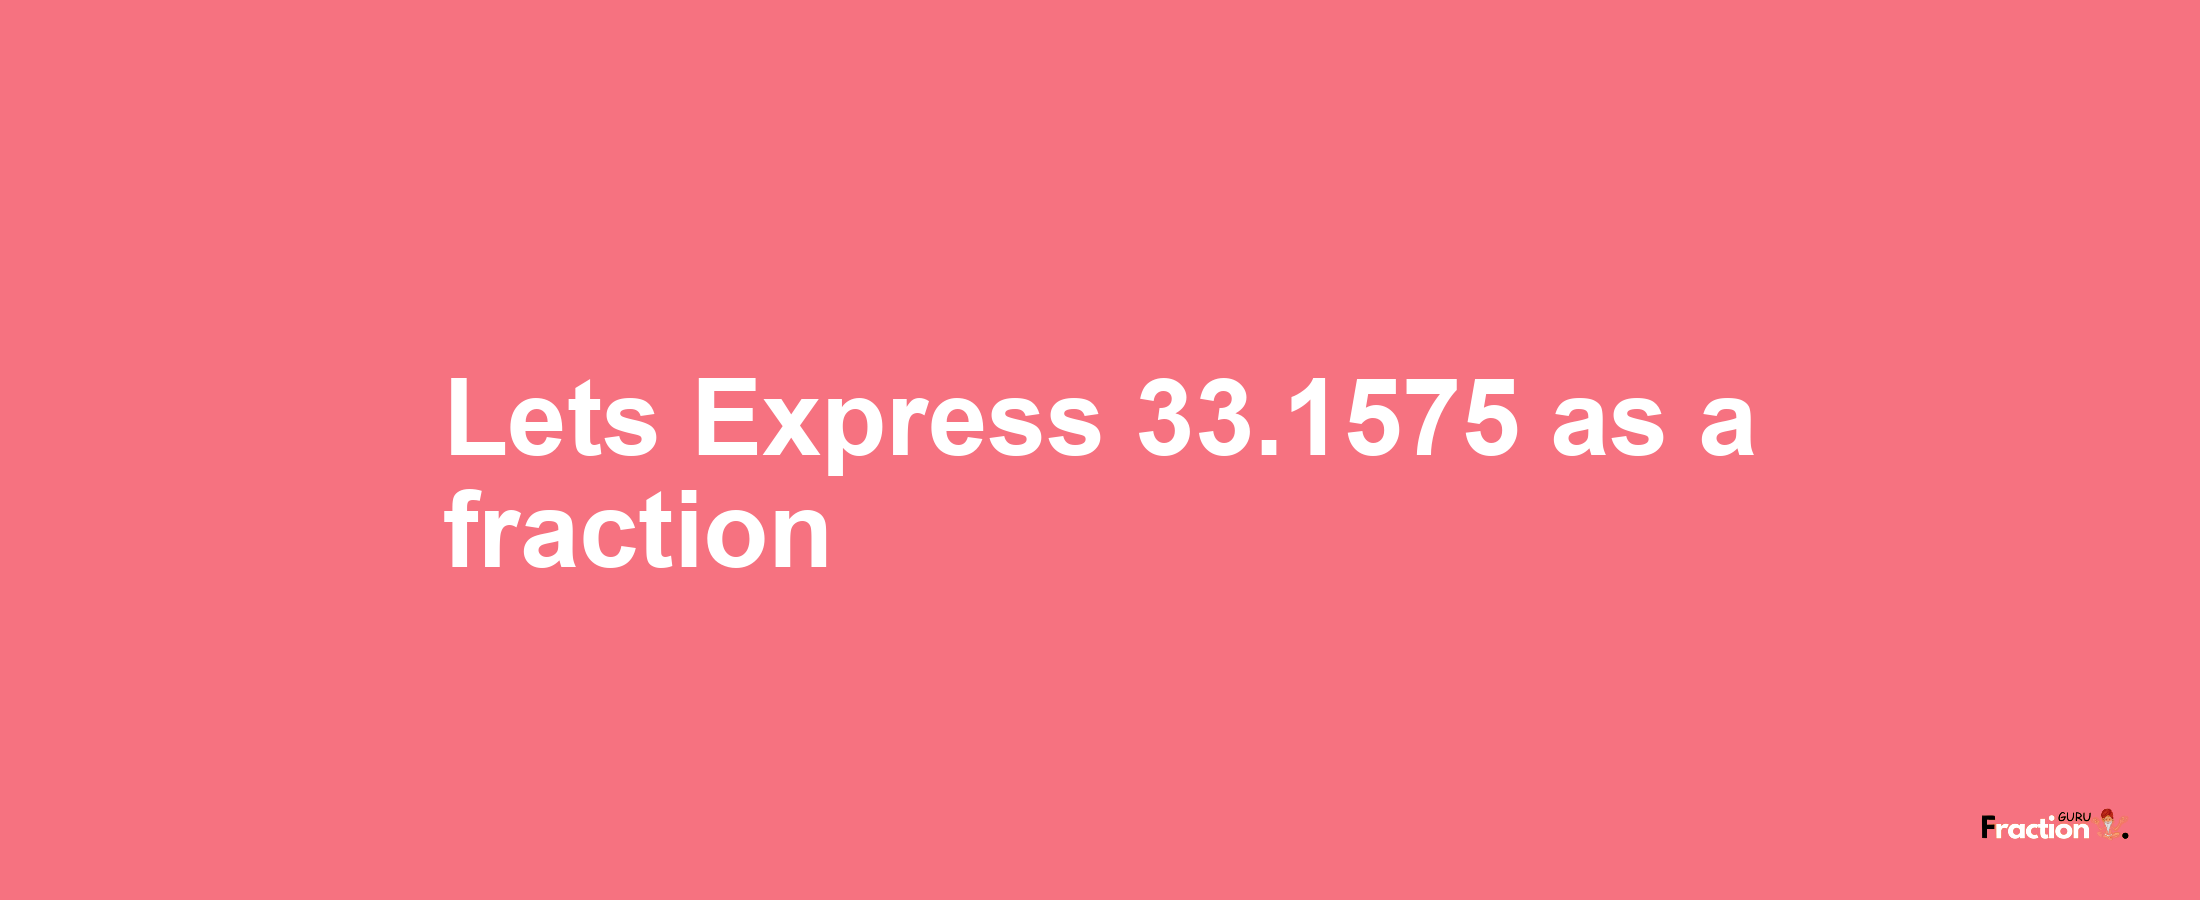 Lets Express 33.1575 as afraction